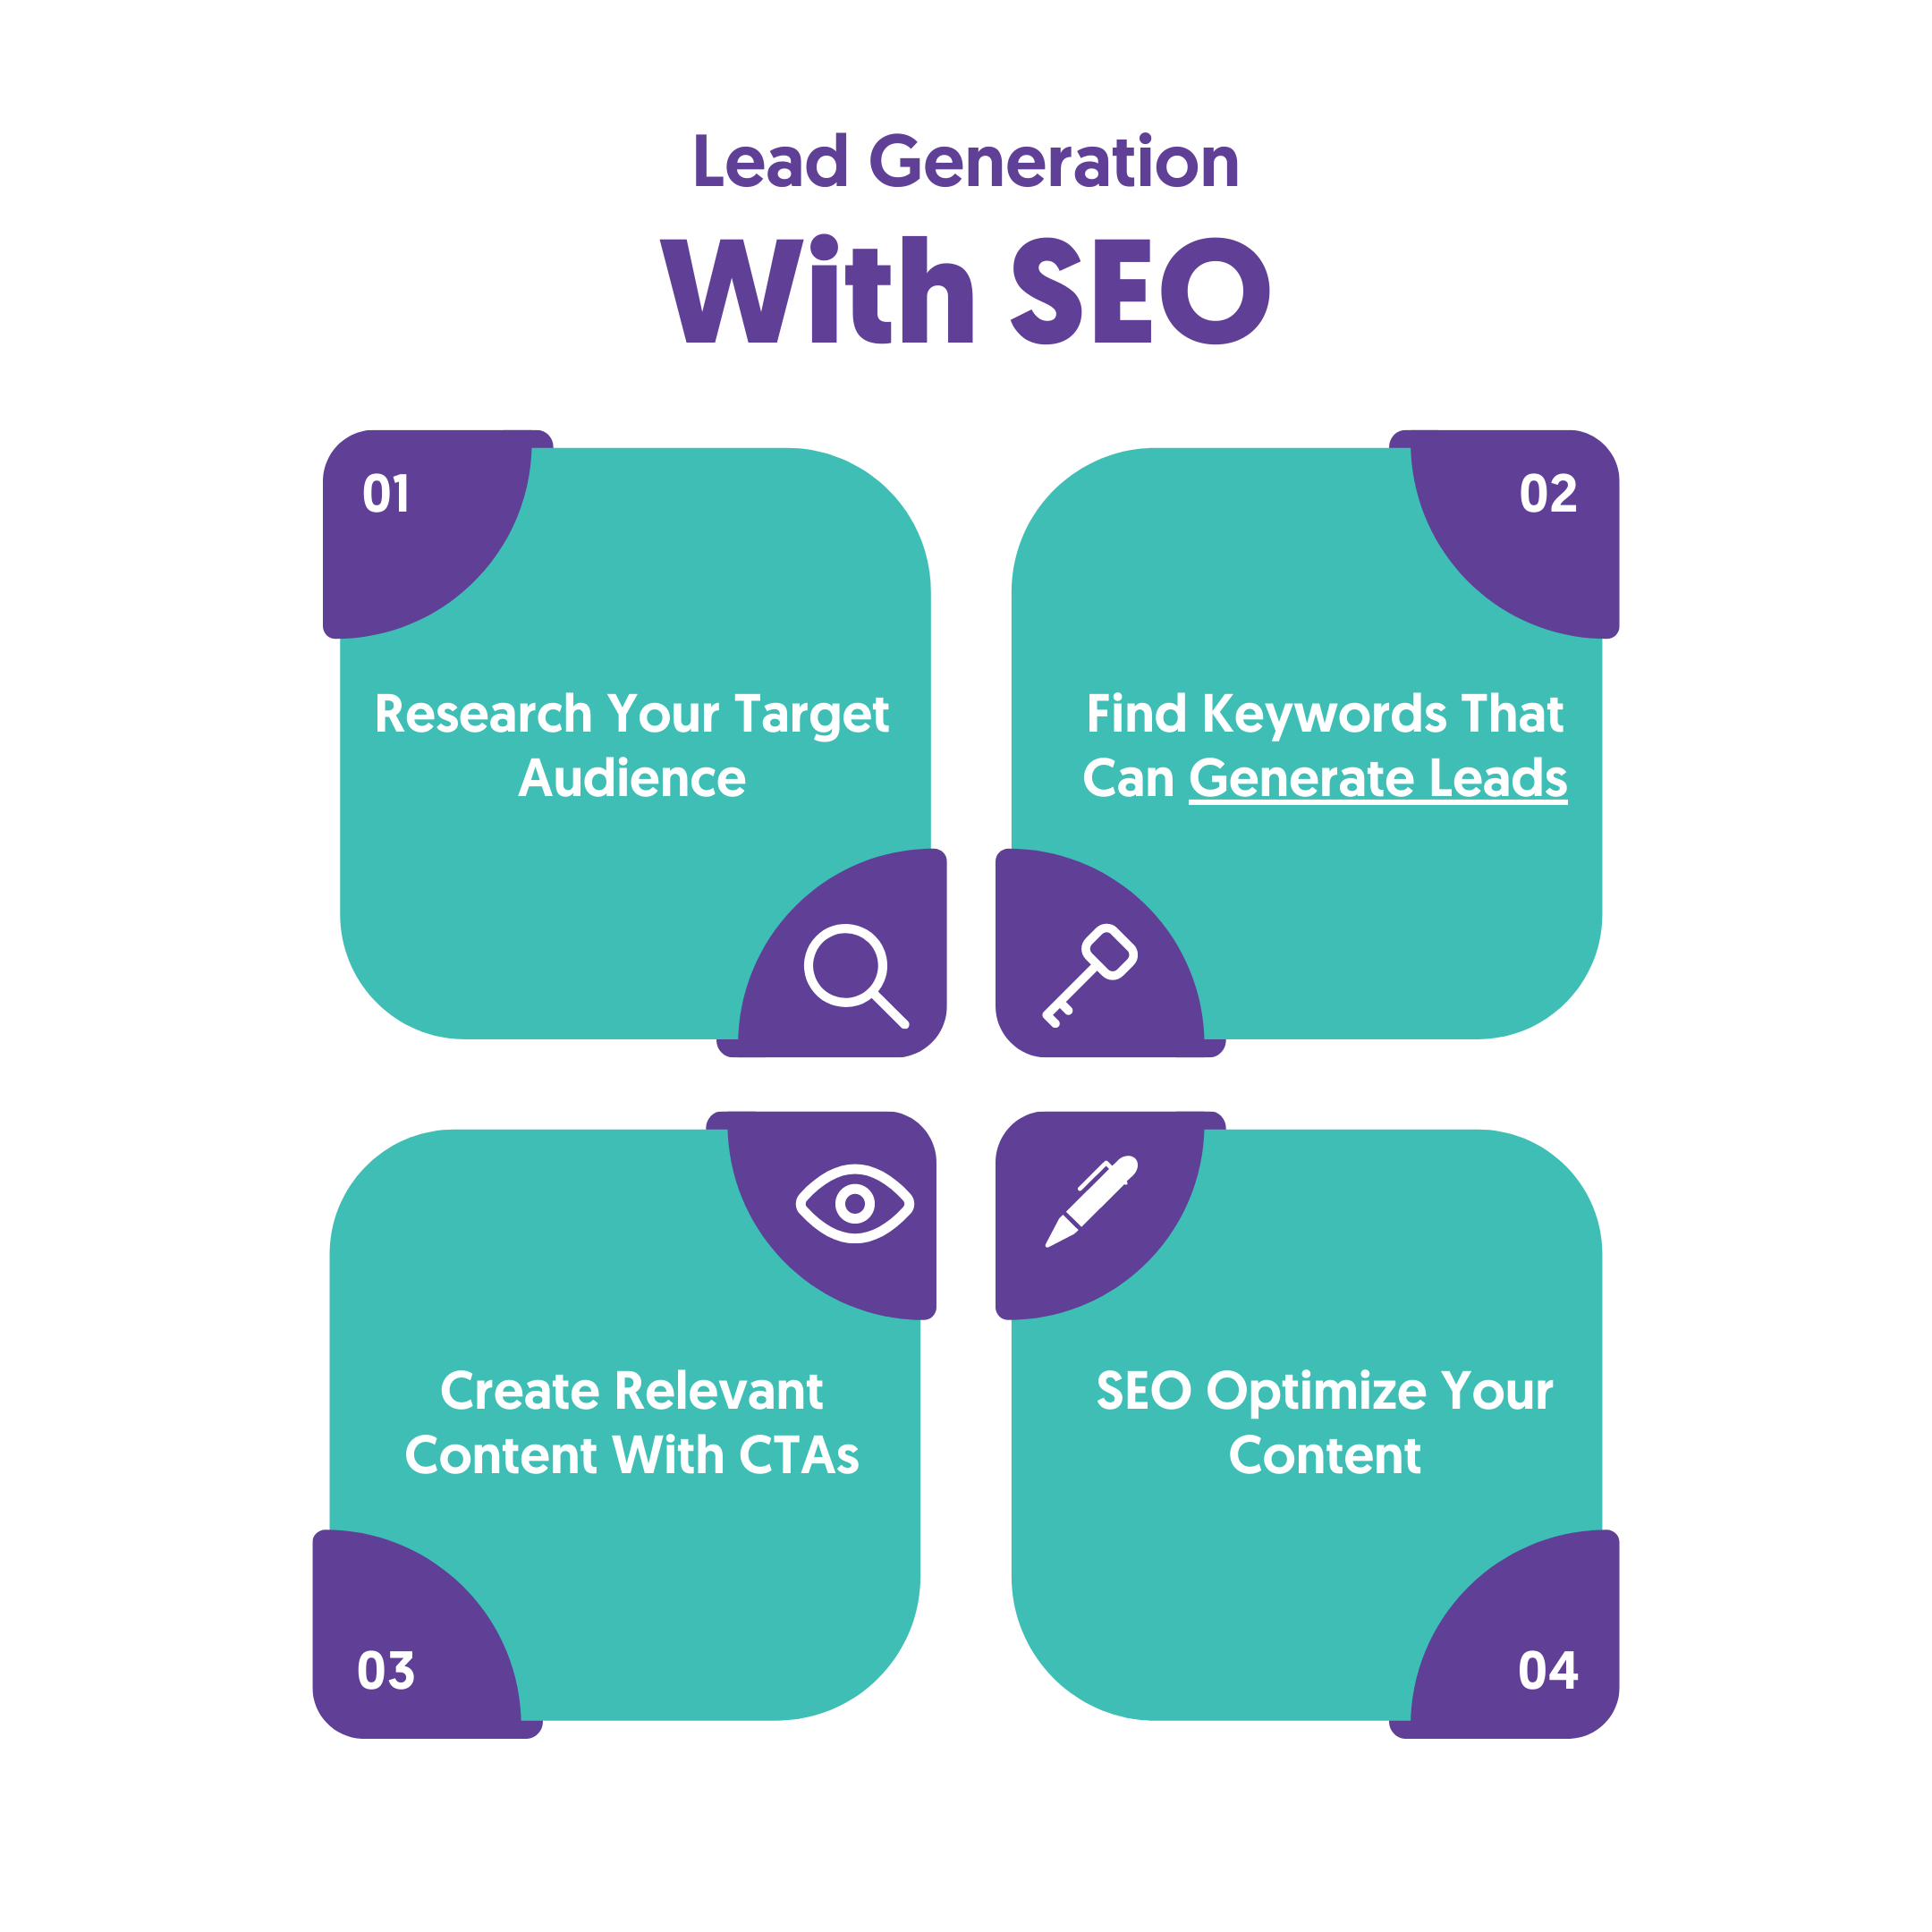 Lead Generation with SEO